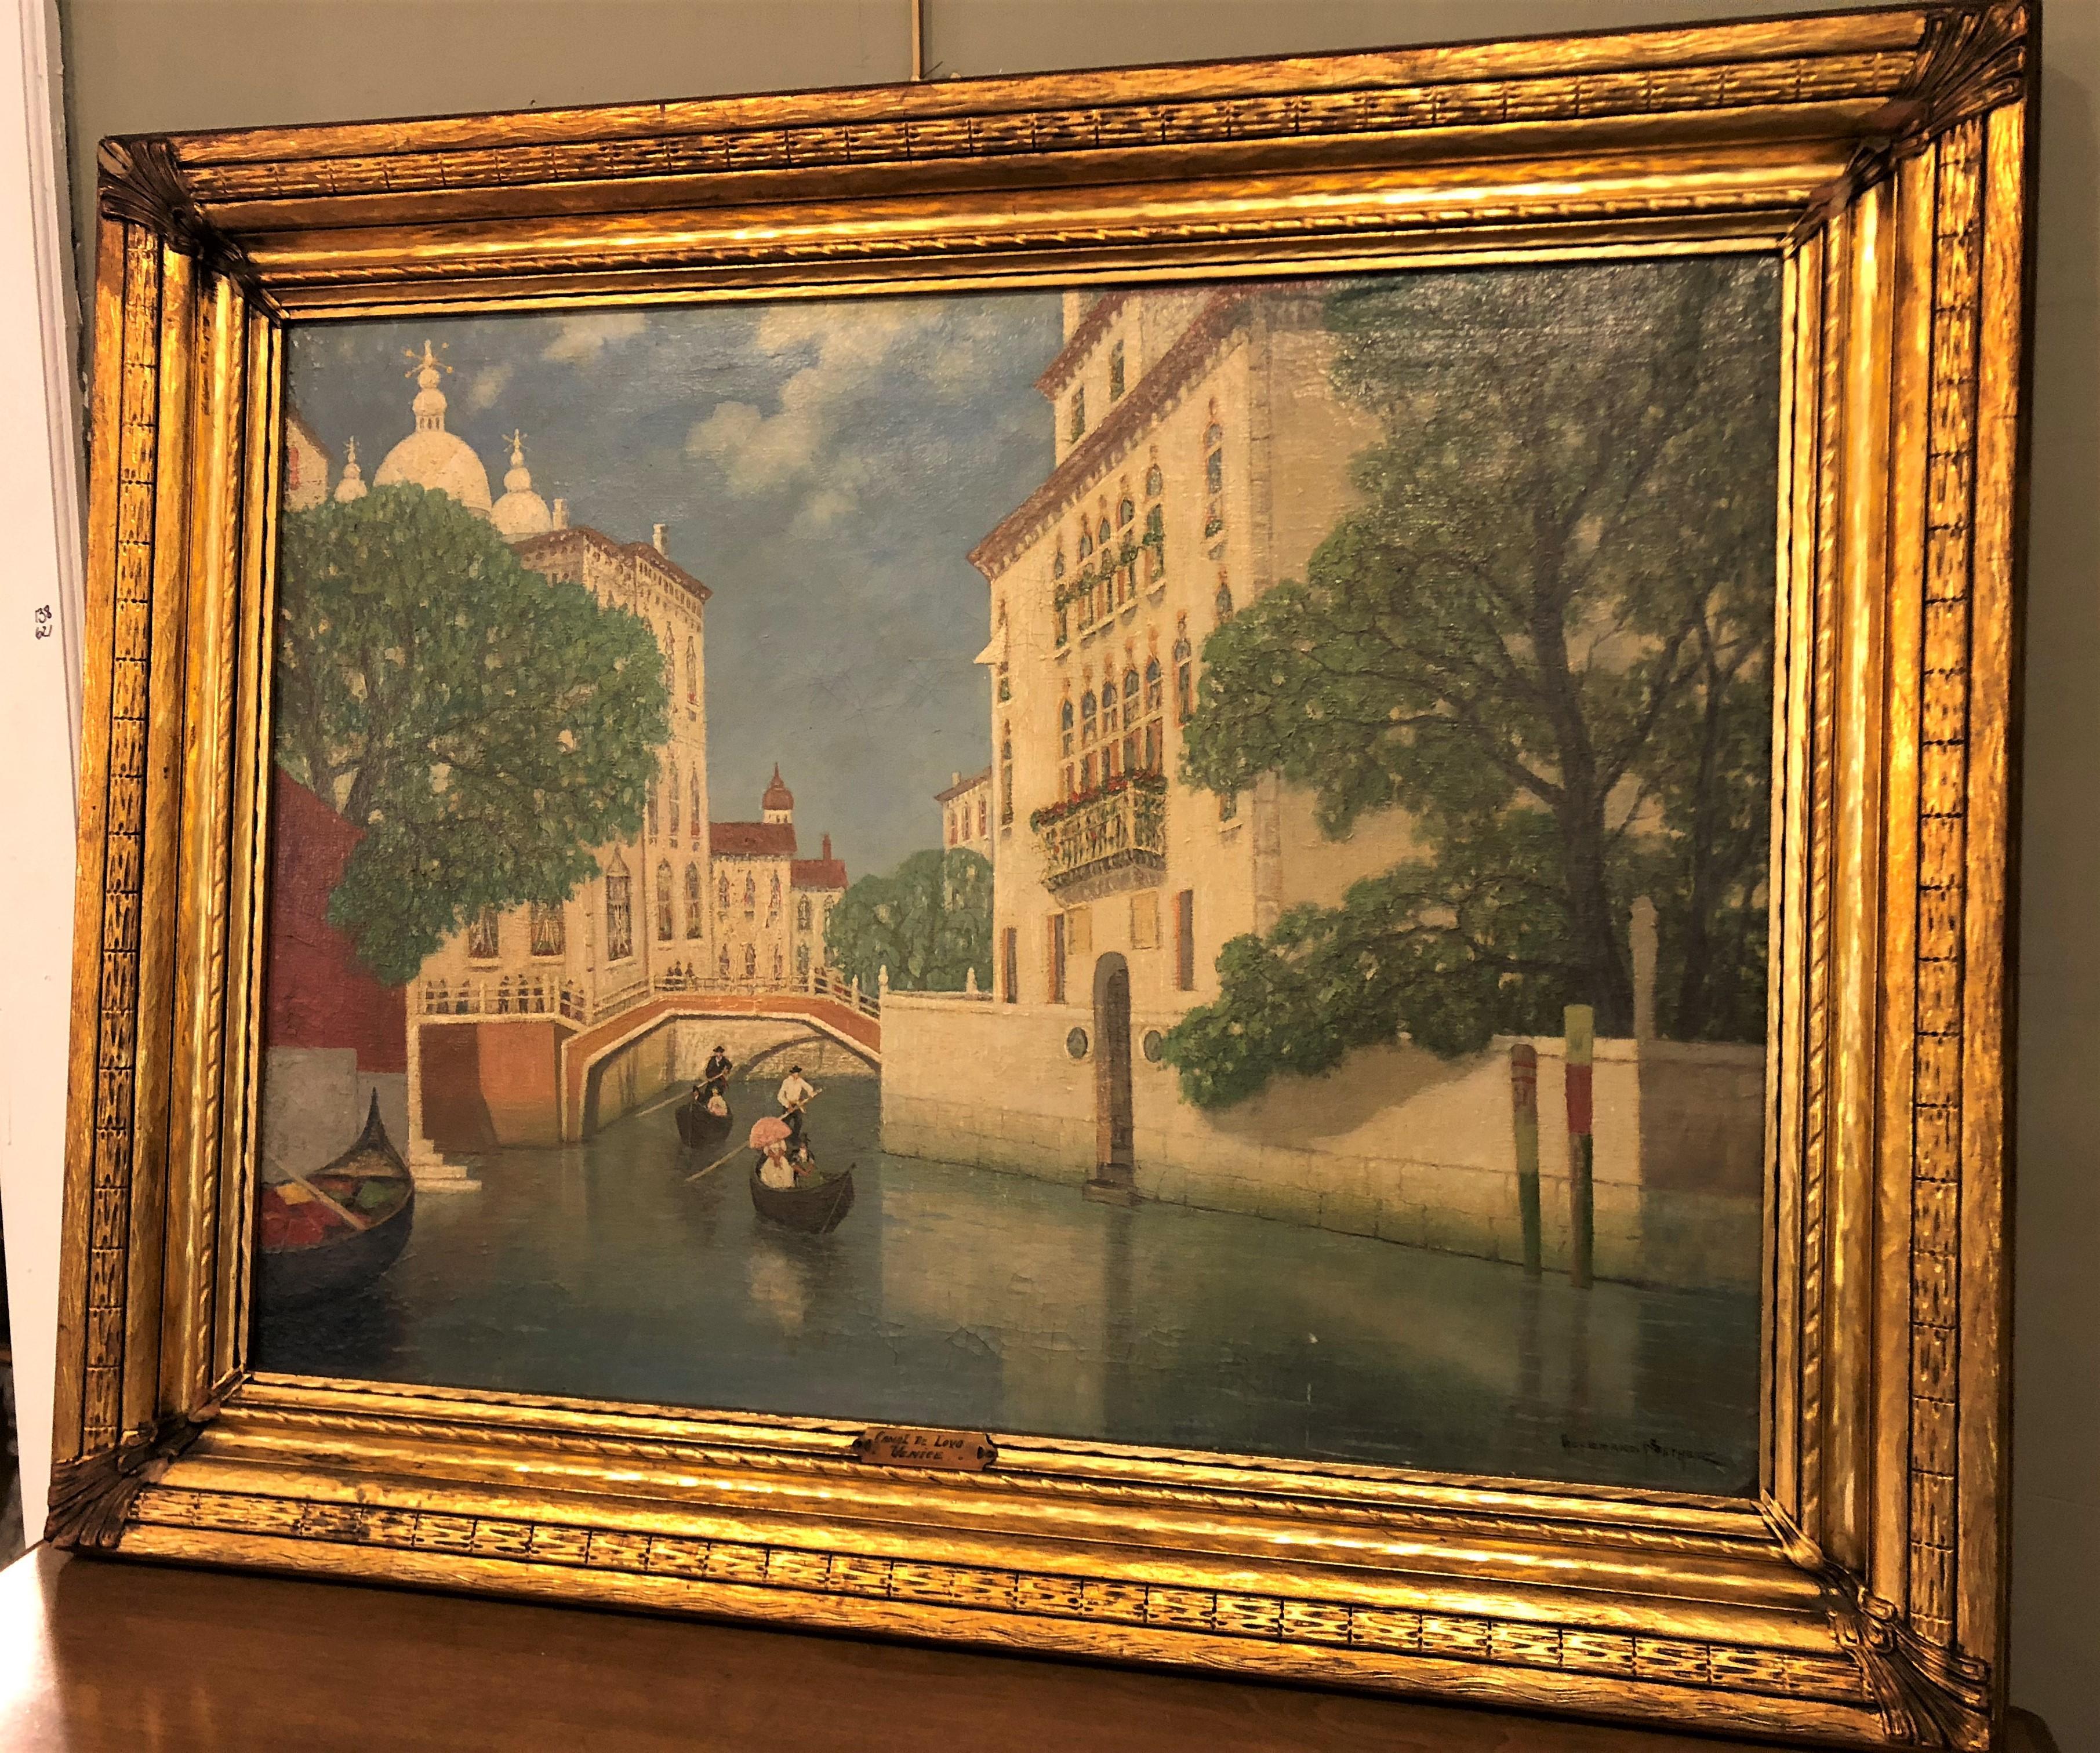 American Classical Gulbrandt Sether Signed Norwegian American Oil on Canvas of a Venice Canal For Sale